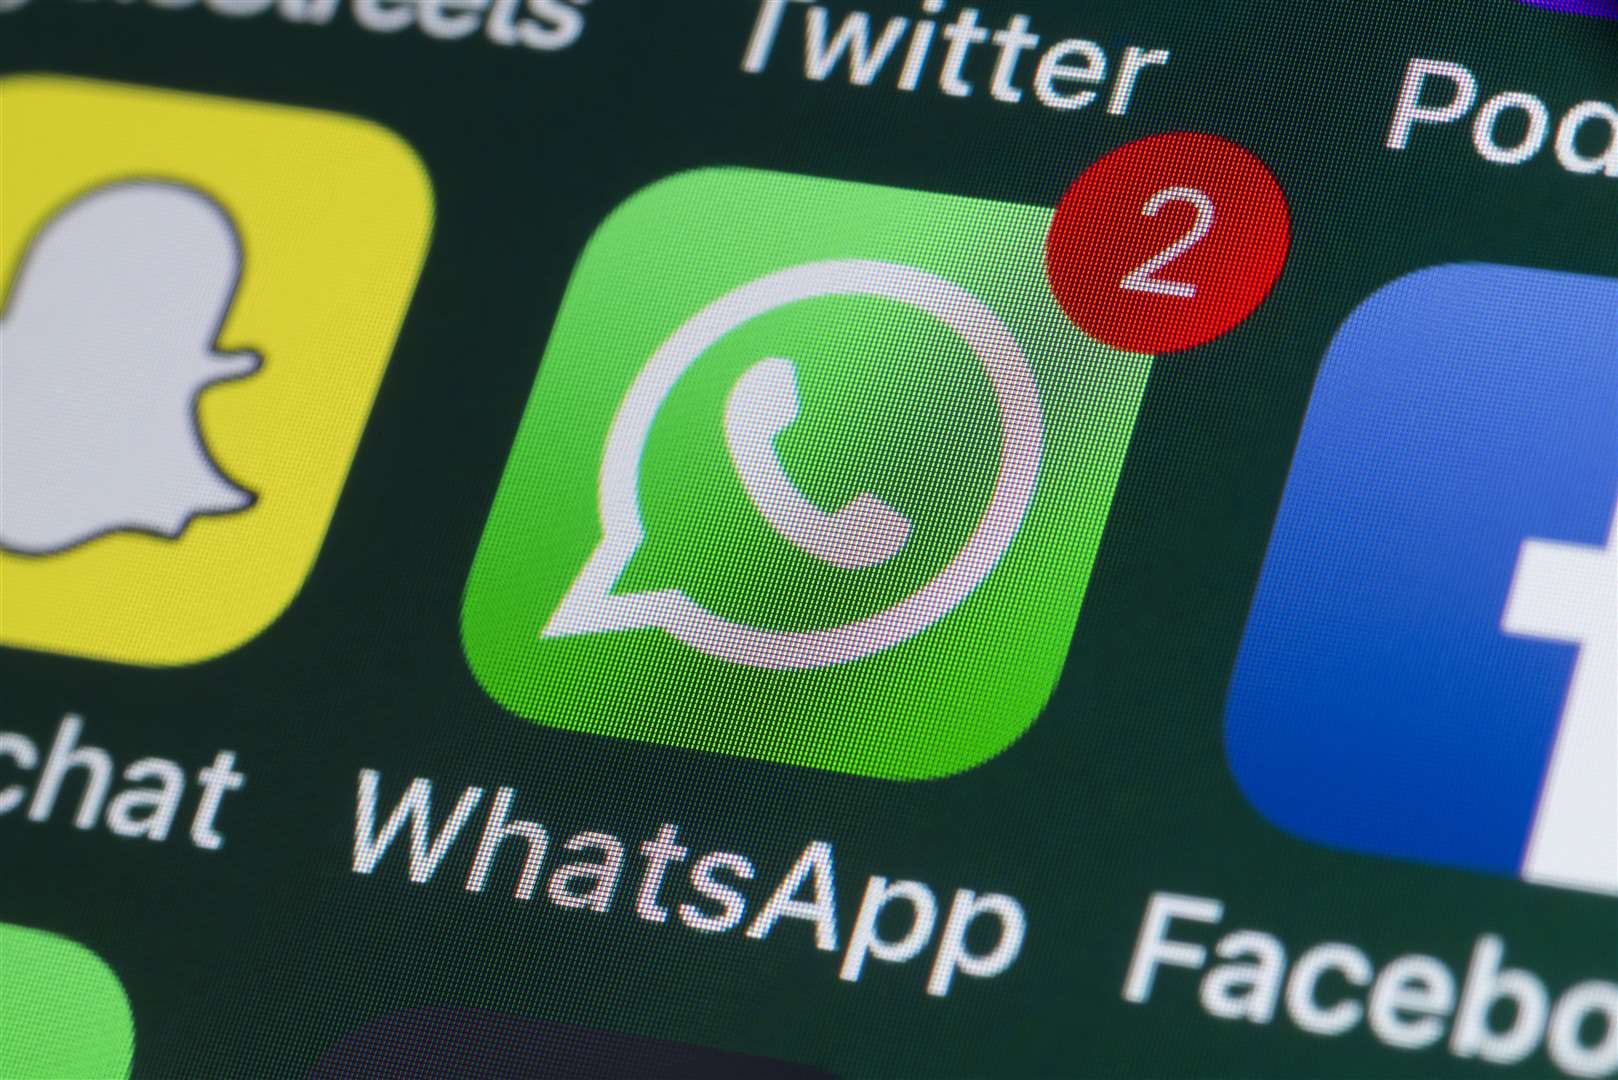 Fraudsters message through WhatsApp claiming they've broken their phone but need money. Photo: Stock image.